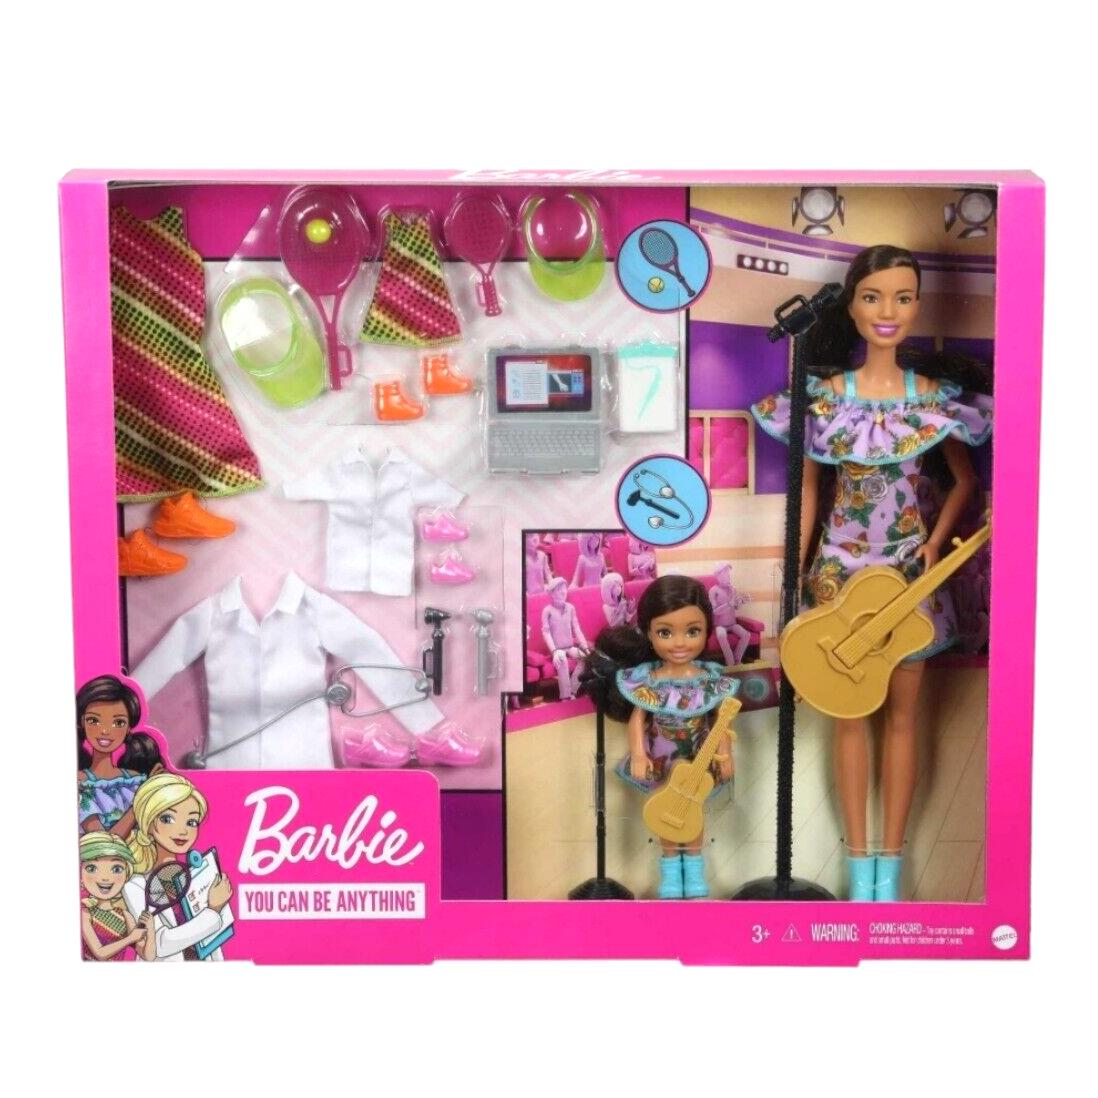 Barbie Chelsea Careers: You Can Be Anything Accessories Playset 2 Dolls Age 3+